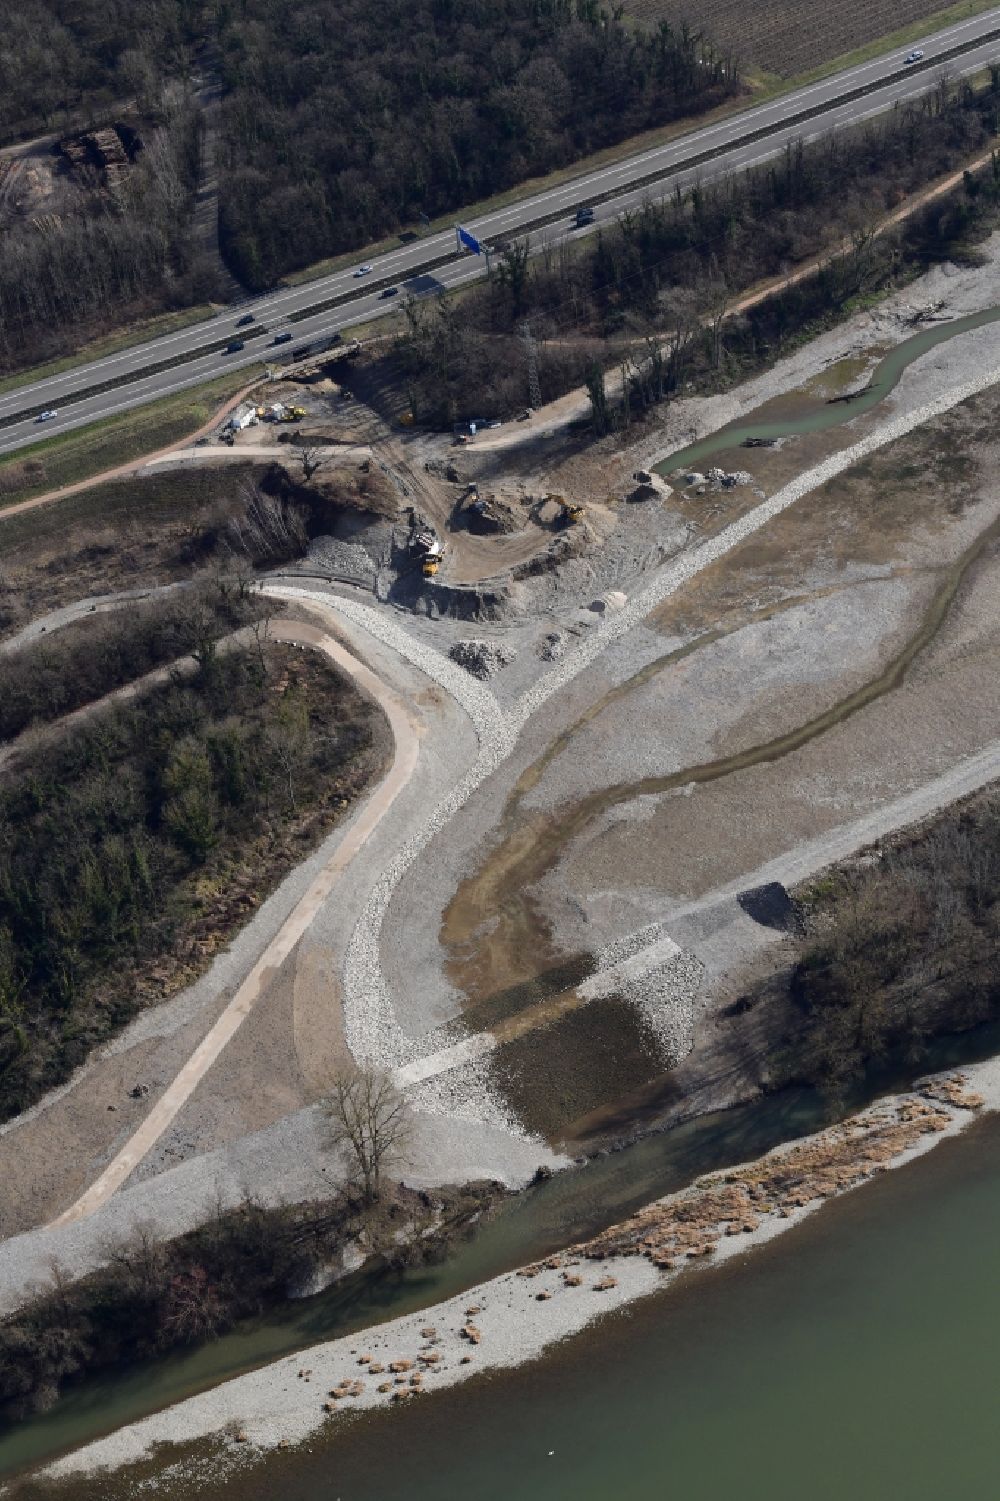 Efringen-Kirchen from the bird's eye view: Construction works on Rhein river for the flood prevention in the district Istein in Efringen-Kirchen in the state Baden-Wuerttemberg, Germany